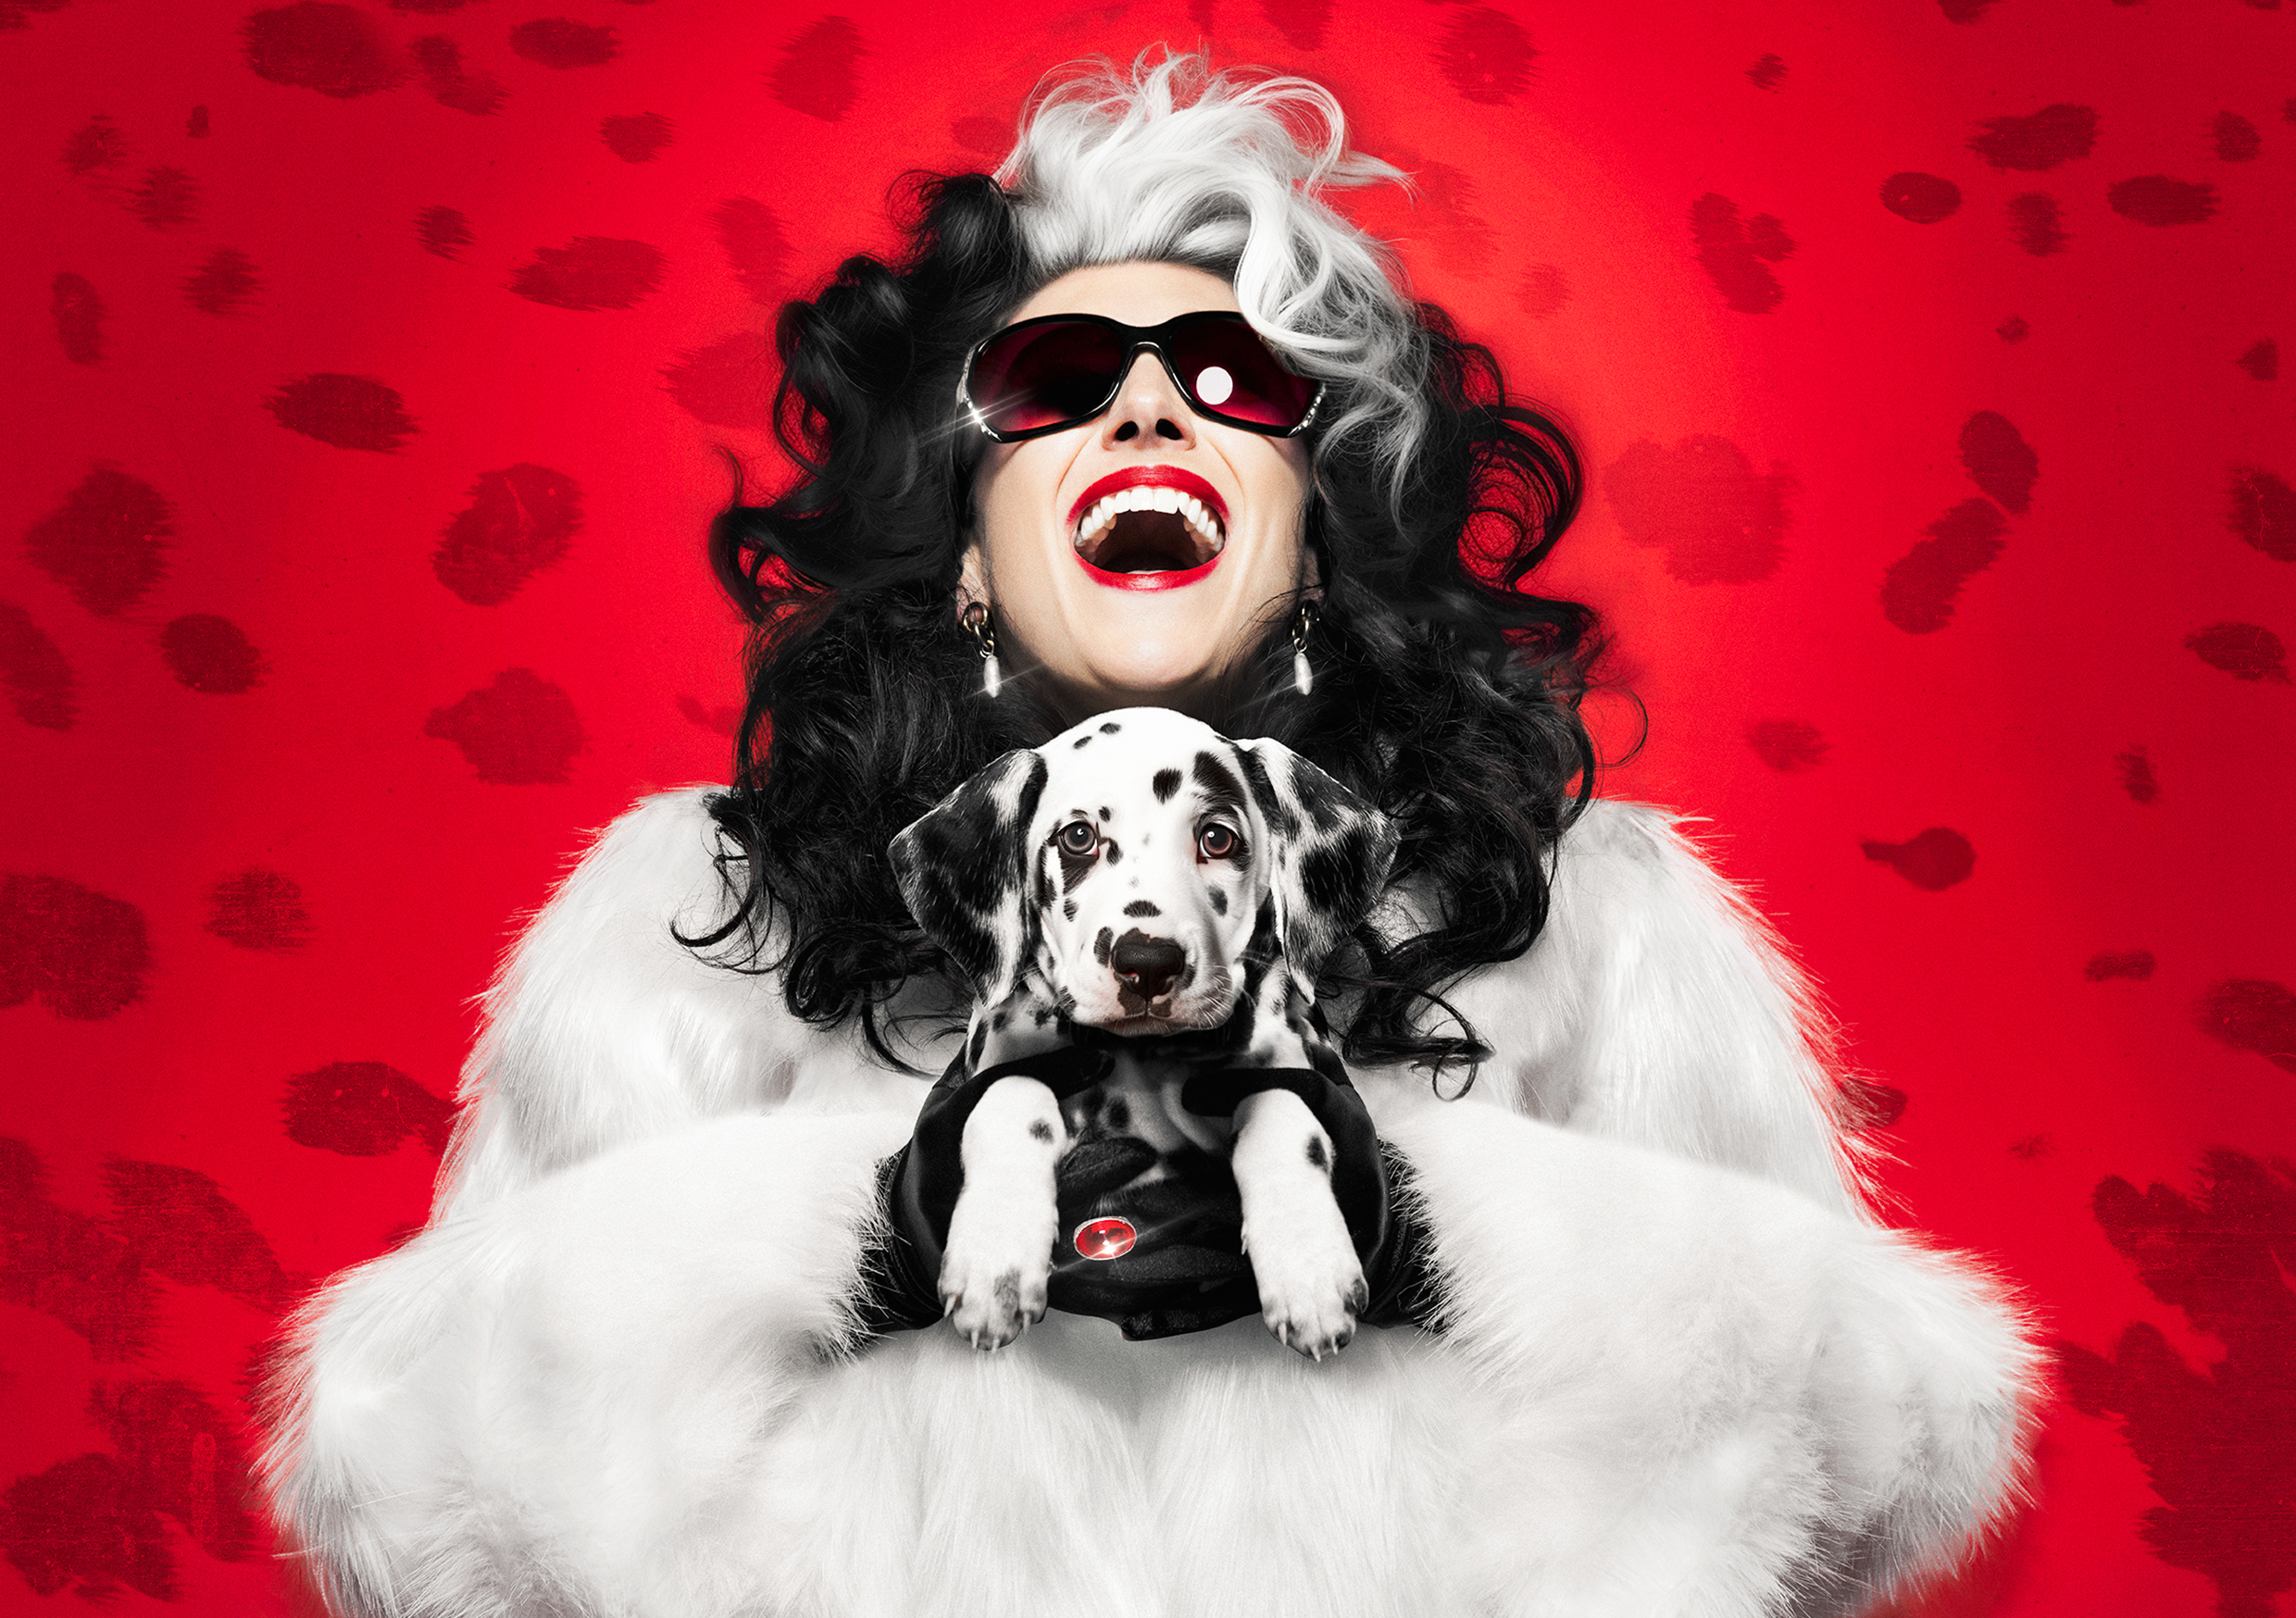 101 Dalmatians The Musical. Credit: Supplied, Oliver Rosser, Feast Creative